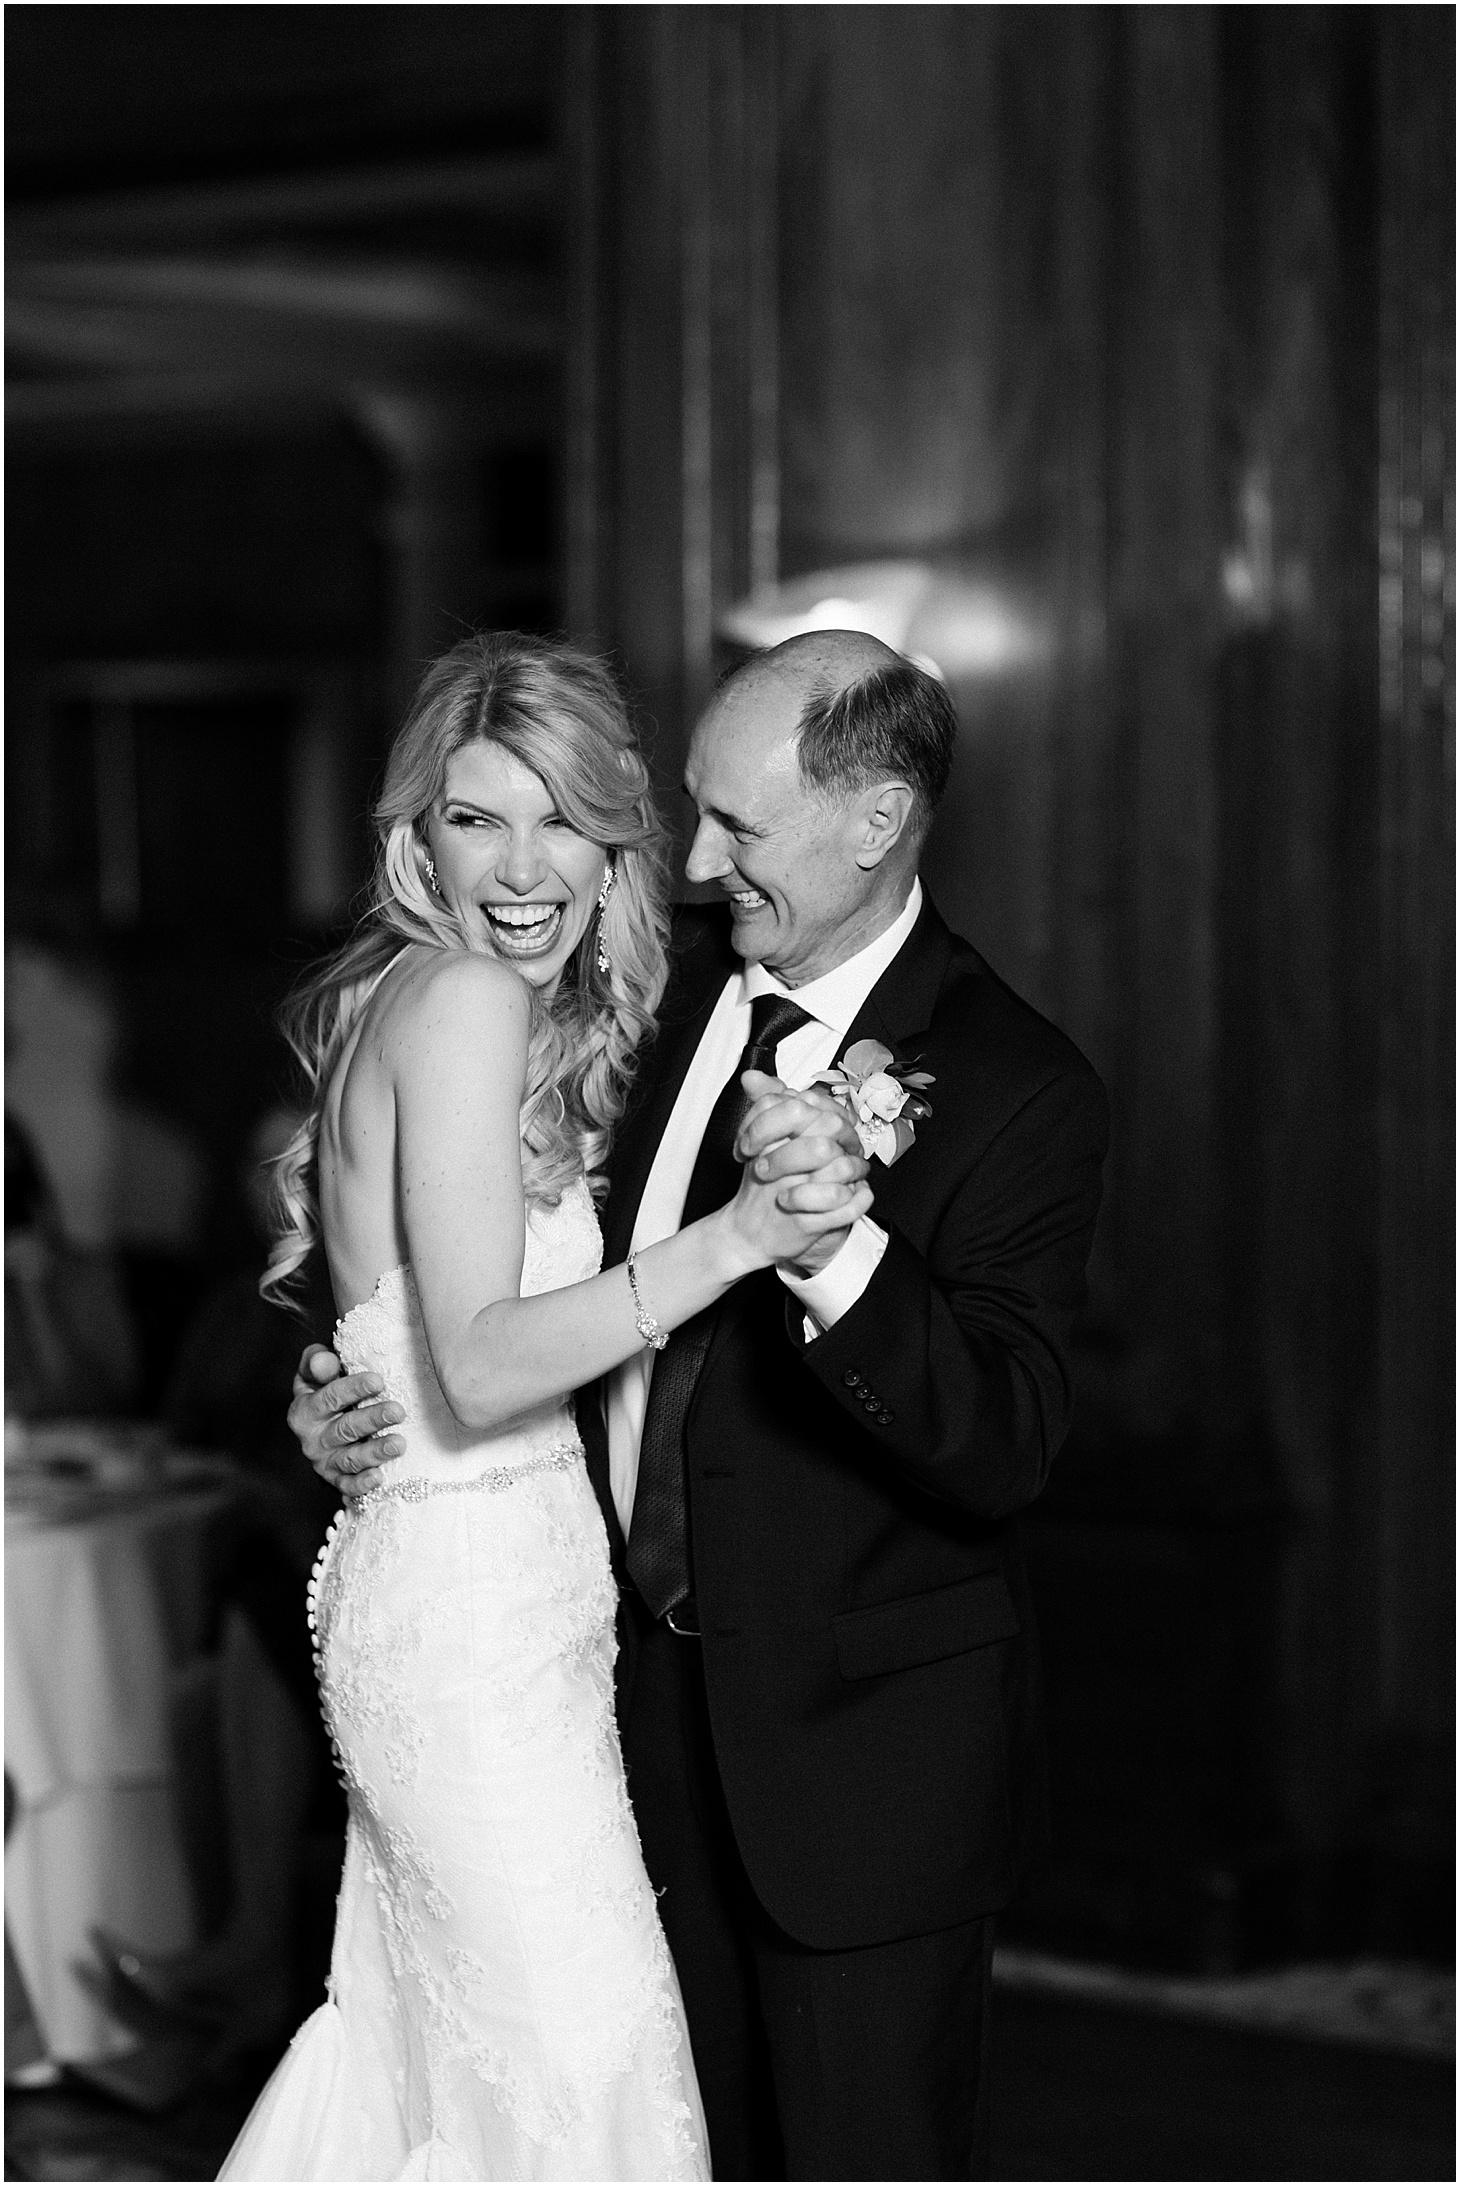 Father-Daughter Dance during Wedding Reception at Army and Navy Club in DC, Navy and Blush Summer Wedding at the Army and Navy Club, Ceremony at Capitol Hill Baptist Church, Sarah Bradshaw Photography, DC Wedding Photographer